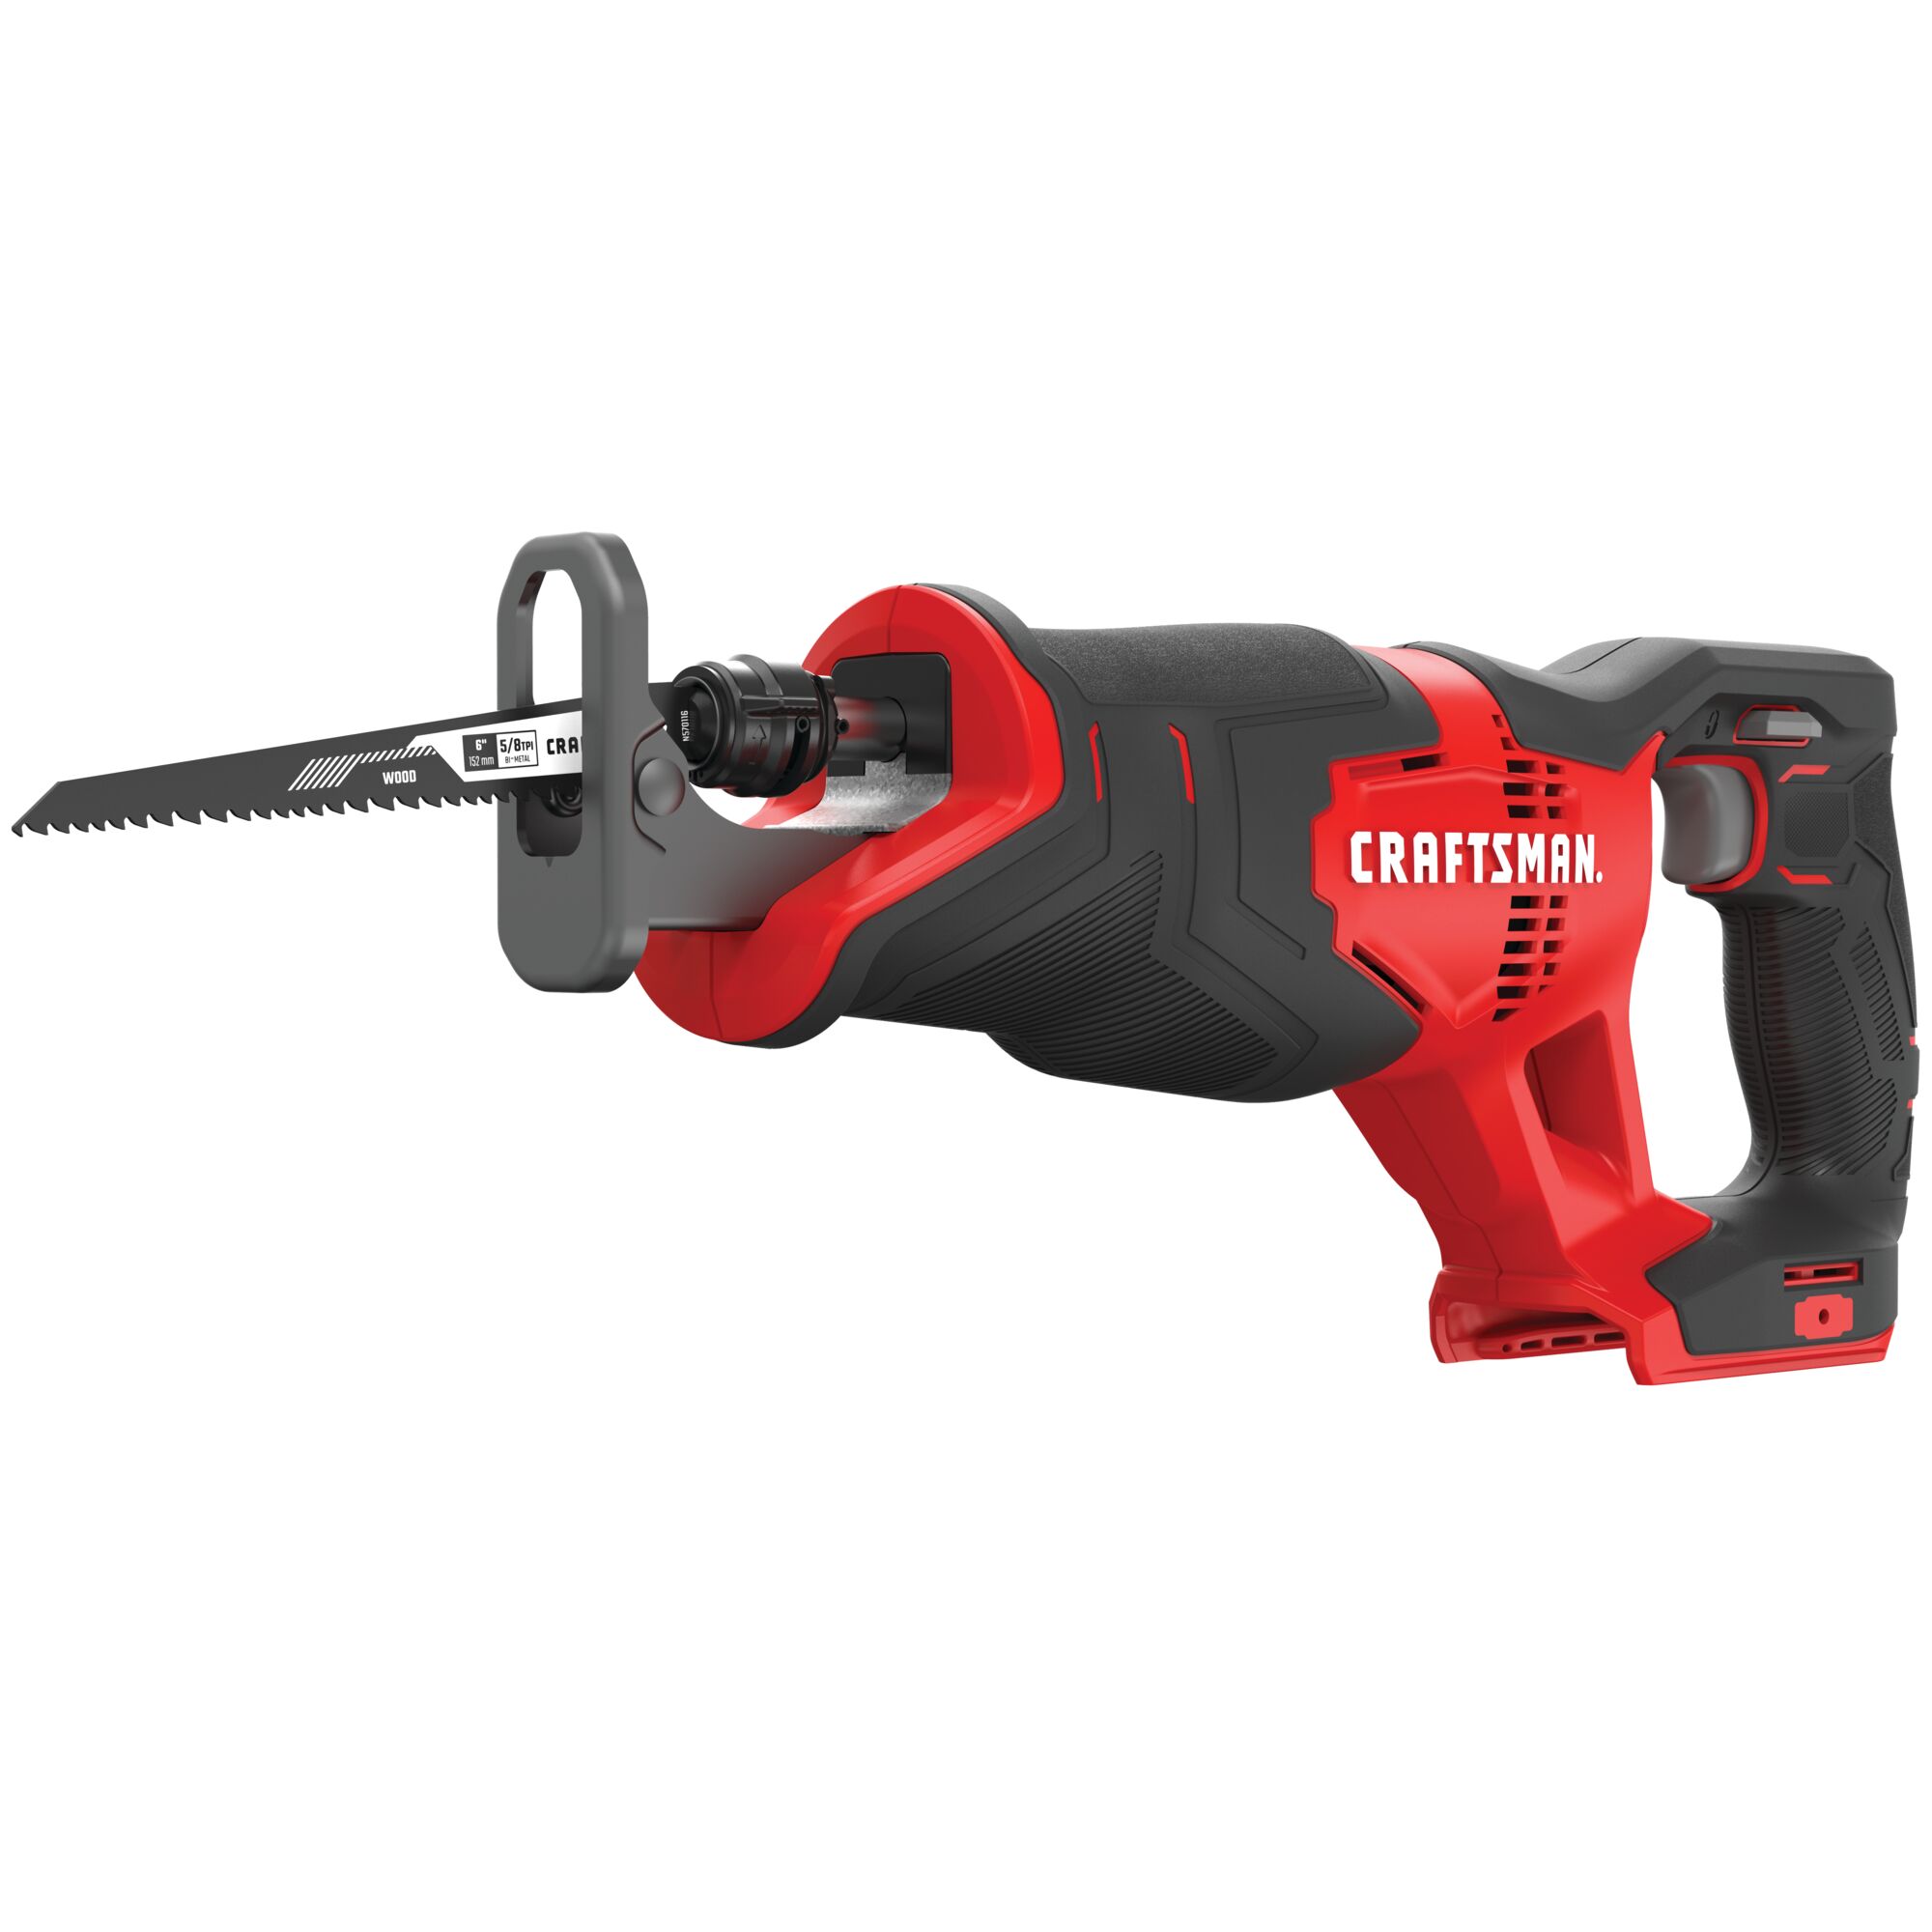 Left profile of 20 volt cordless reciprocating saw.